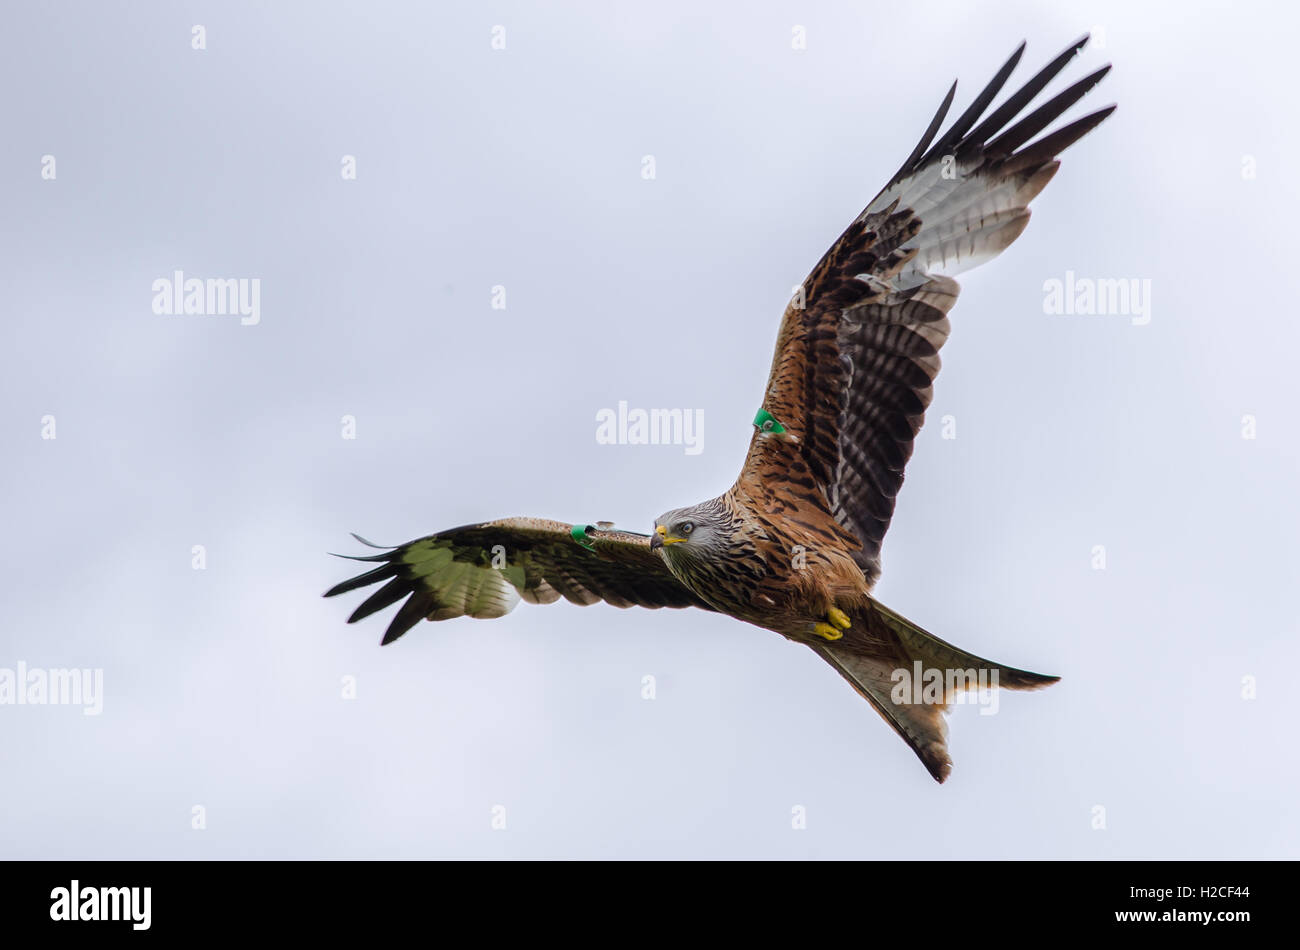 A Red Kite (Milvus milvus) with green wing tags files against a cloudy sky in Galloway, Scotland Stock Photo